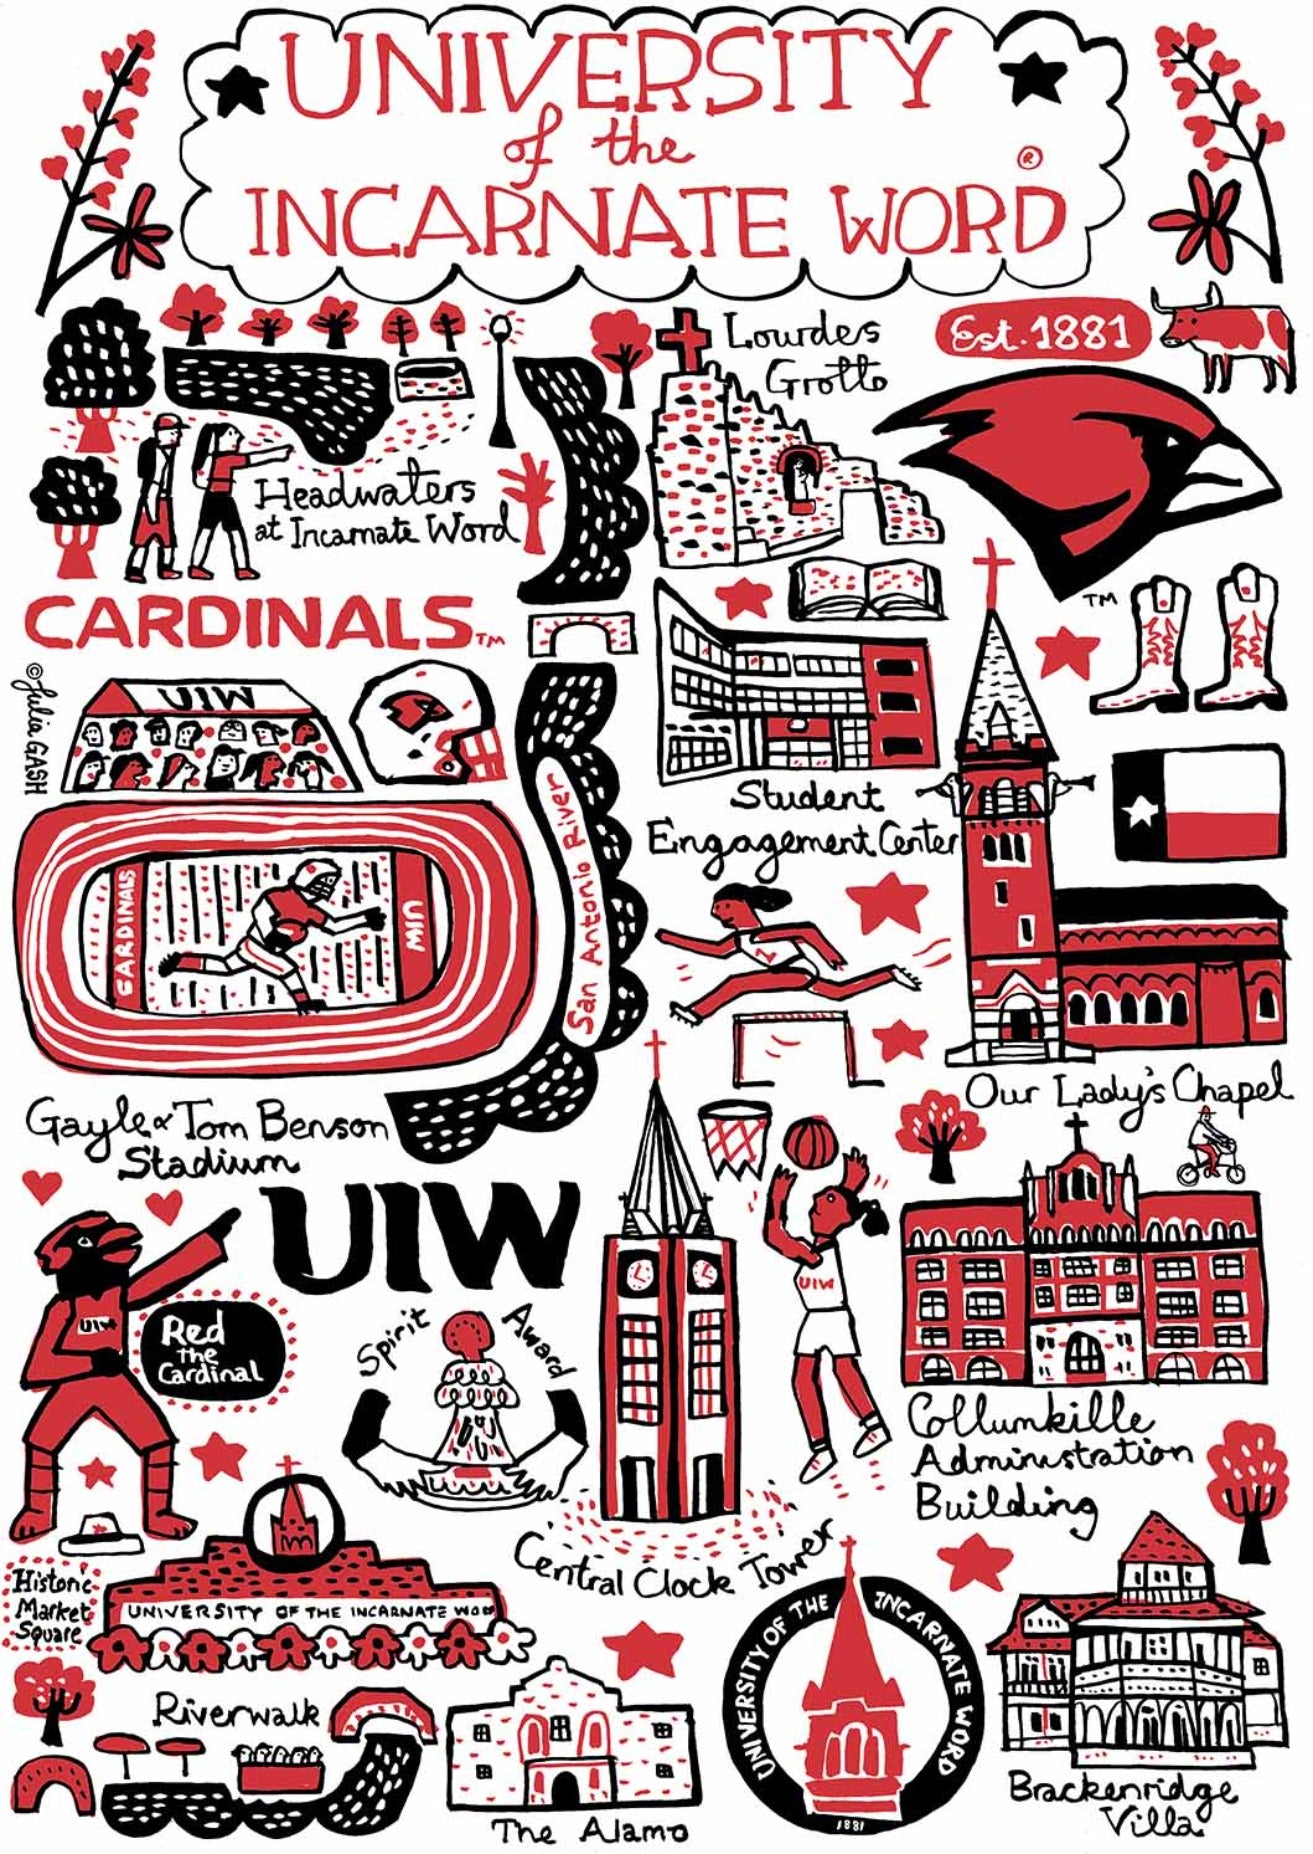 University of the Incarnate Word by Julia Gash